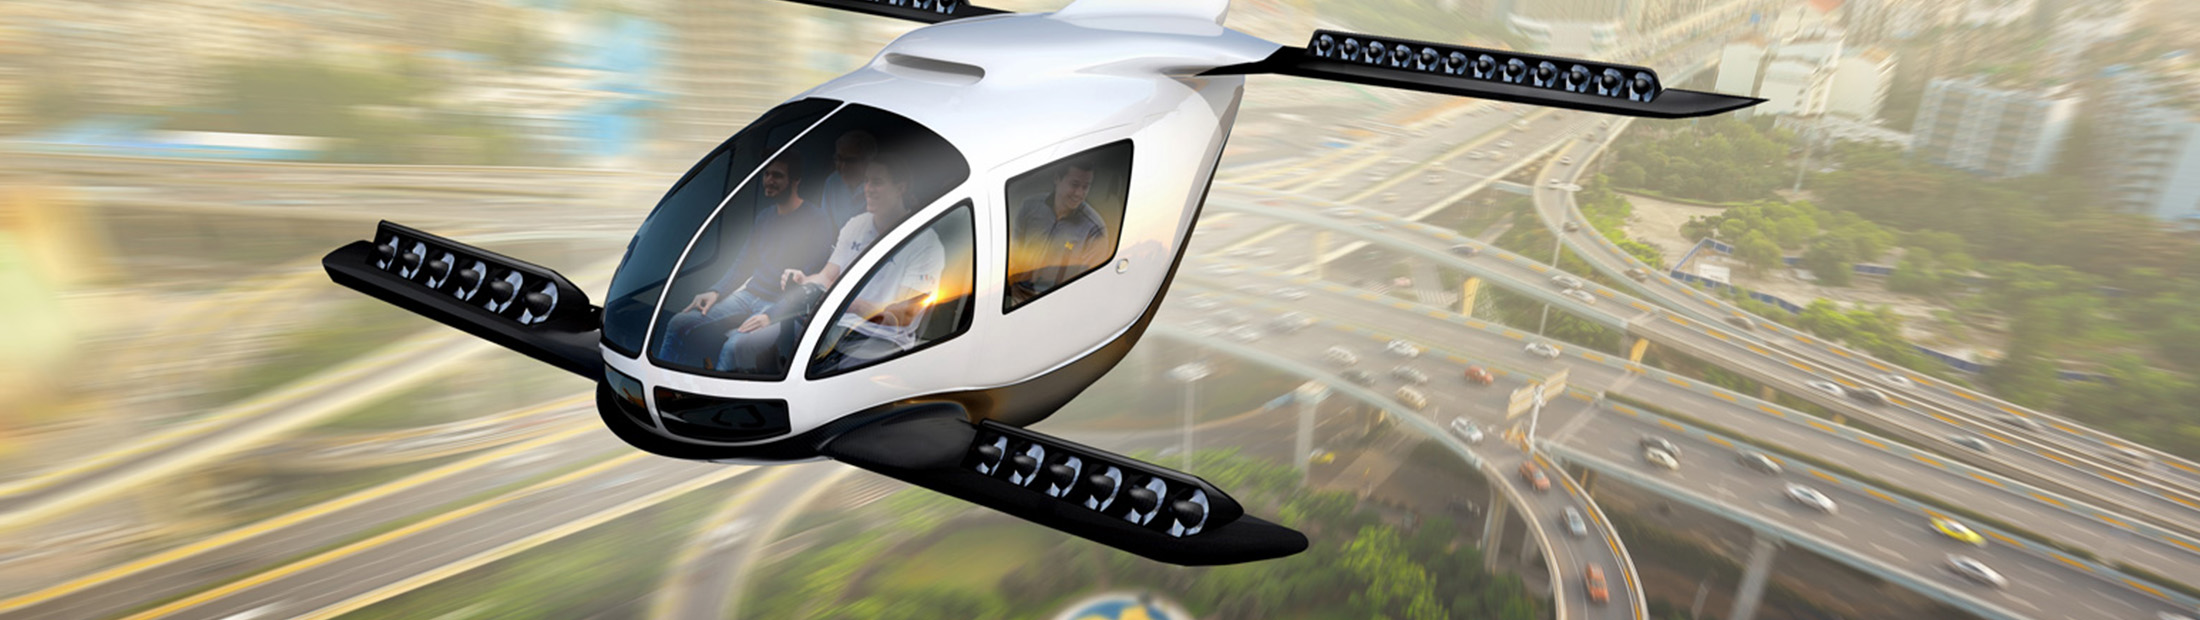 Simulation of a Person in flying vehicle far above the highway